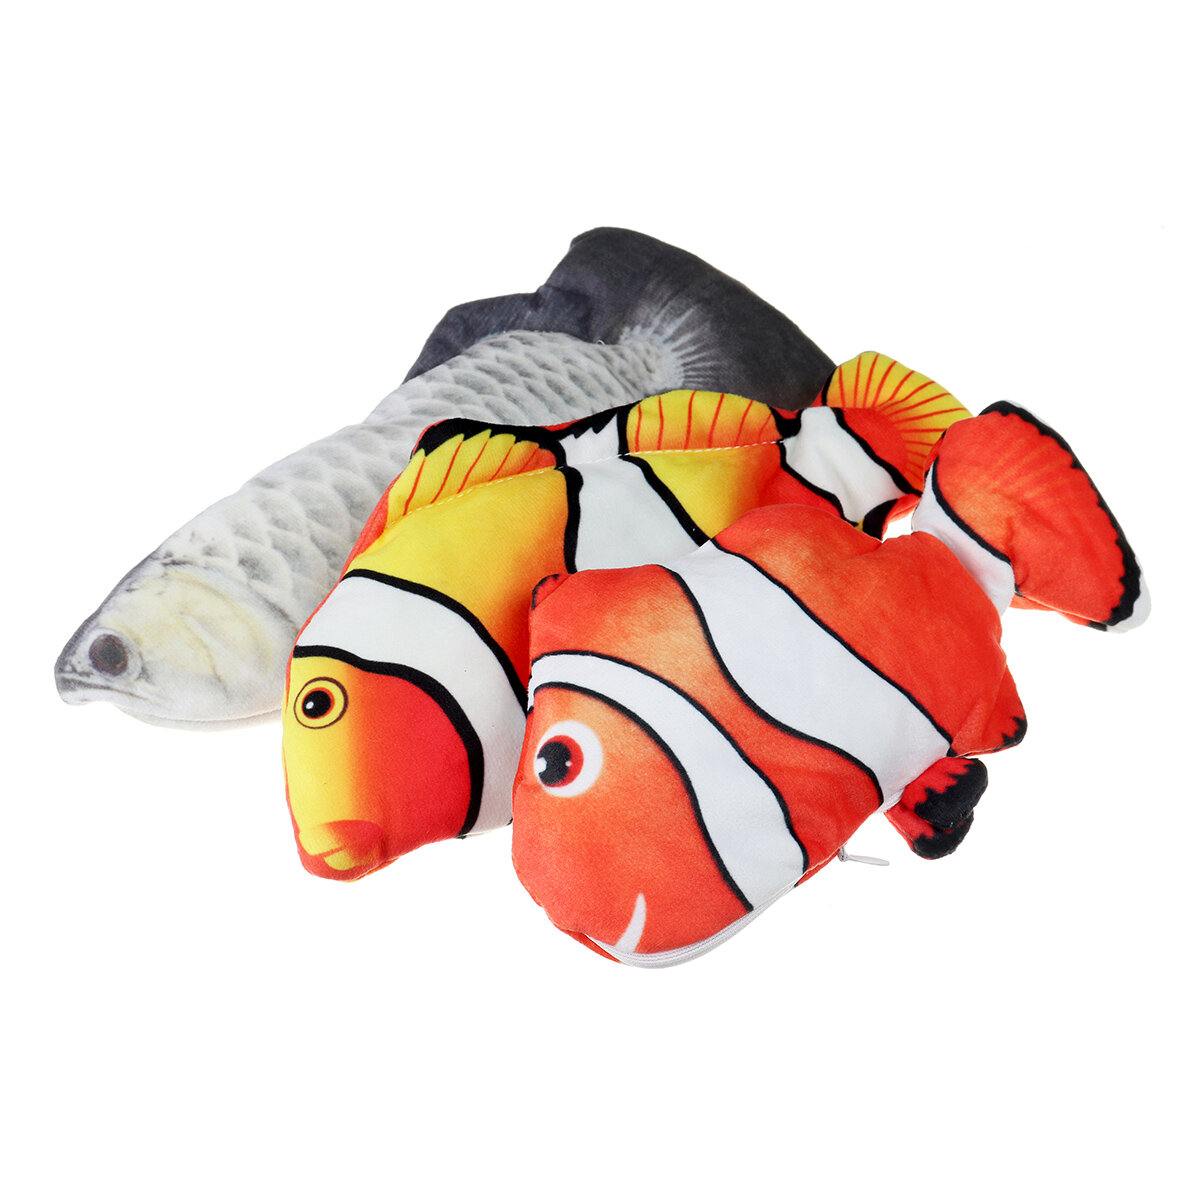 Electric Fish Toy Soft Realistic 3D USB Charged Red/Yellow/Silver Fish Toy Cat Playing Accessories For Home Garden